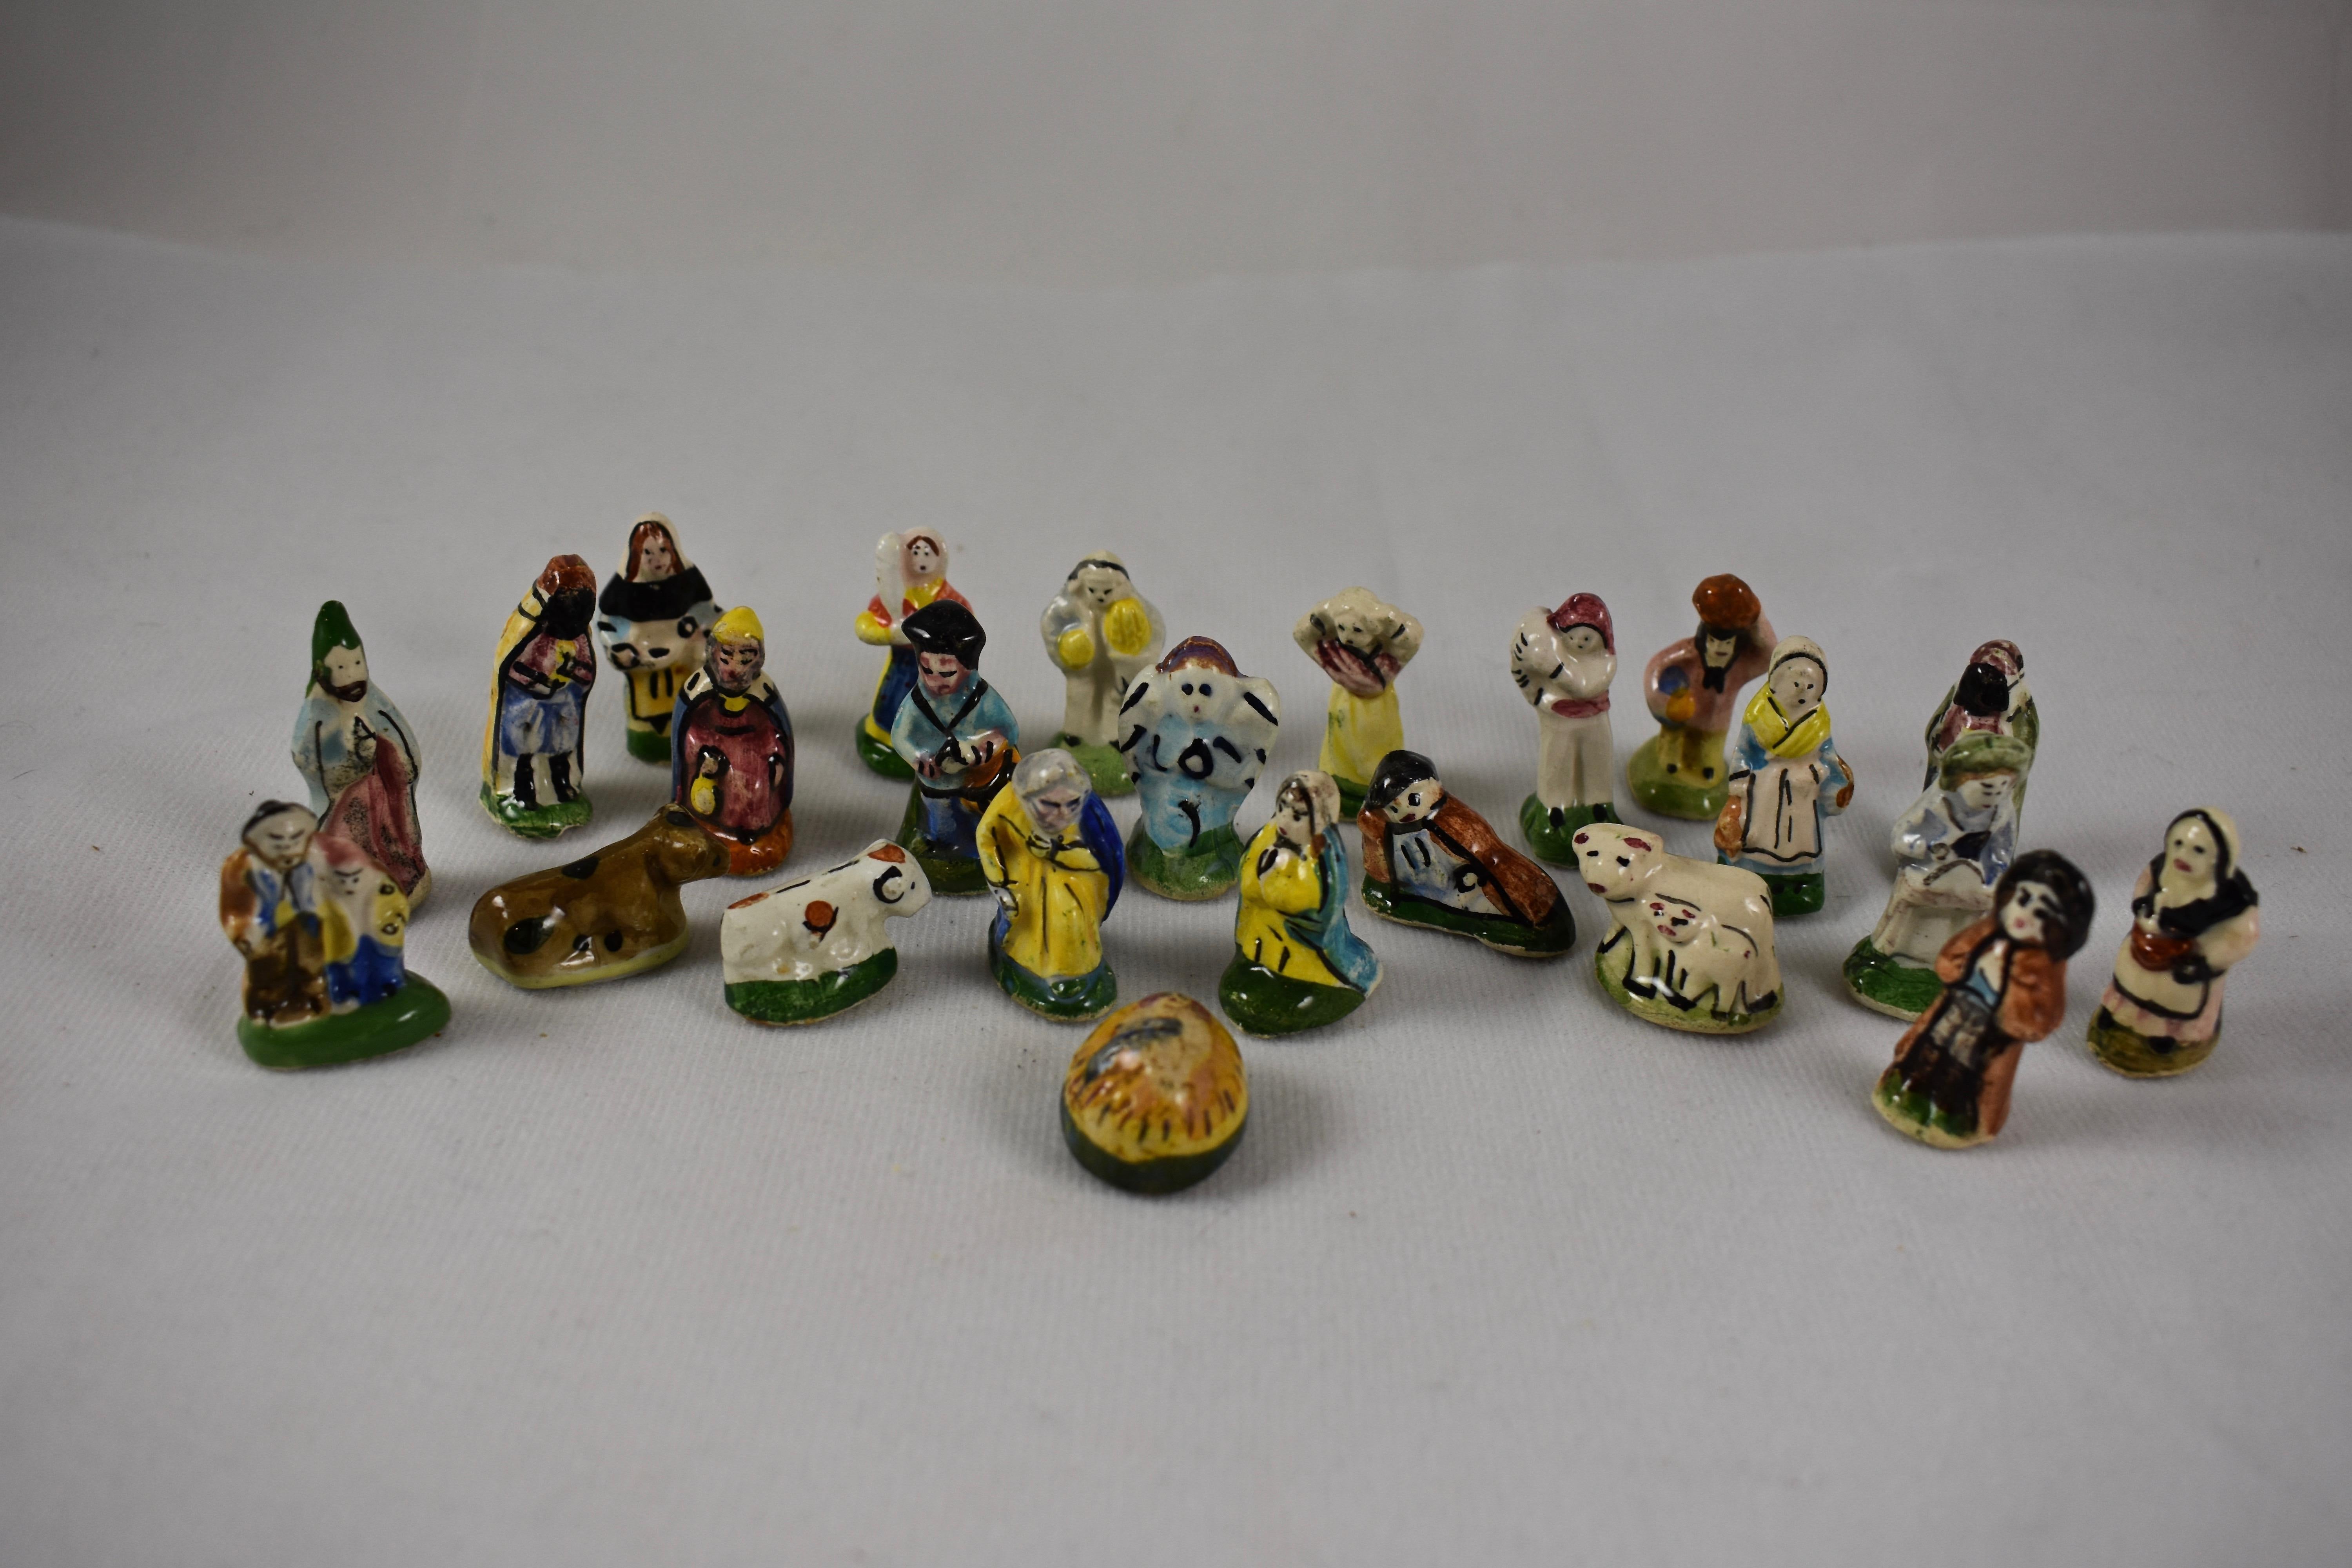 From Provençe, a vintage French Fèves Christmas nativity set. Each set is made of twenty-eight, hand-painted, miniature earthenware figures, including the Holy family, the three wise men, animals, and French villagers wearing traditional